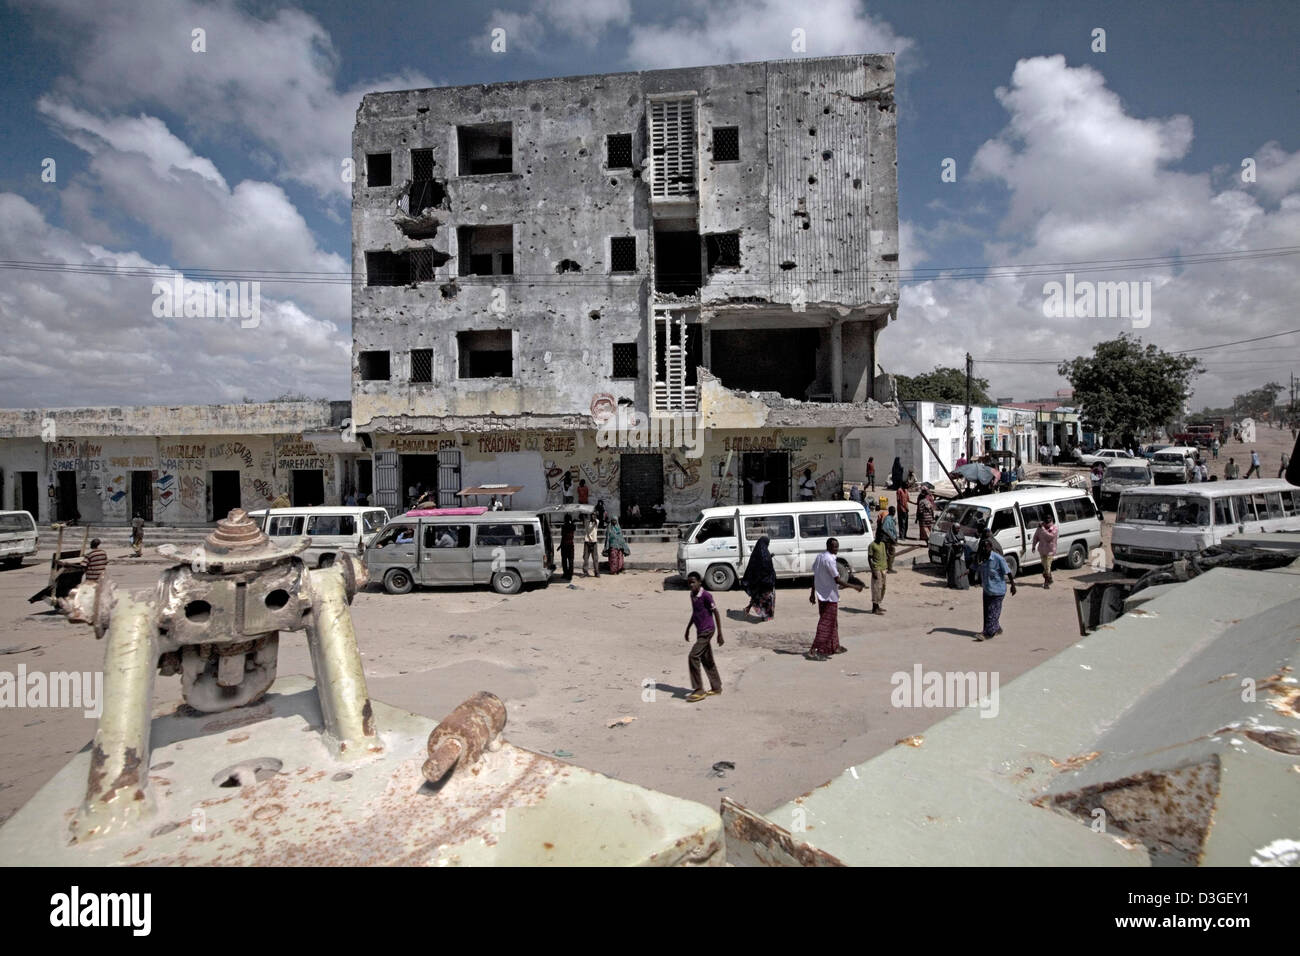 A building riddled with mortar and bullet potholes in downtown Mogadishu, Somalia taken from an AMISOM Casper armoured vehicle. Stock Photo